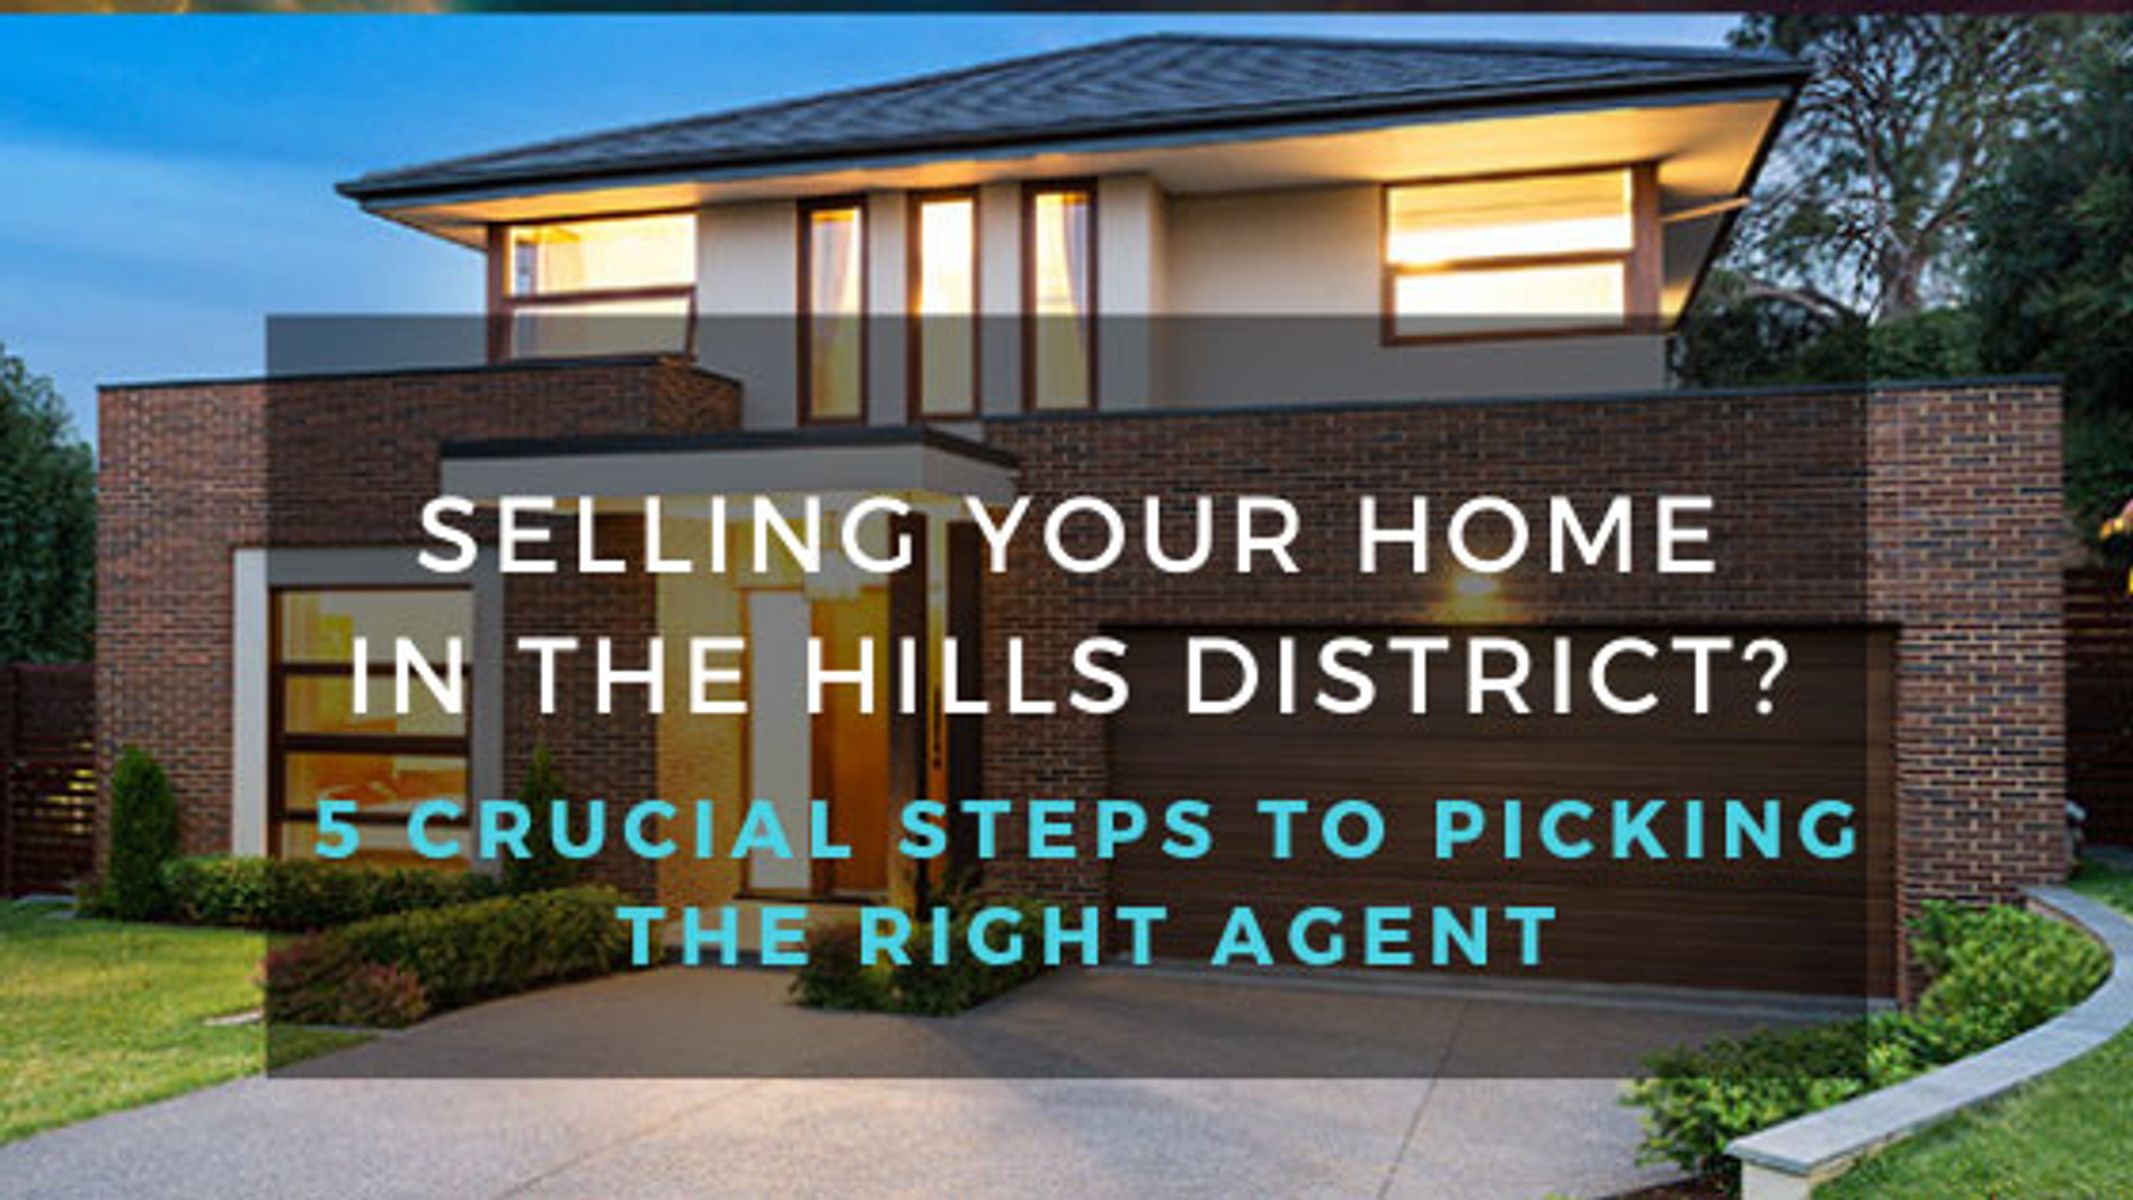 Selling Your Home In The Hills District?